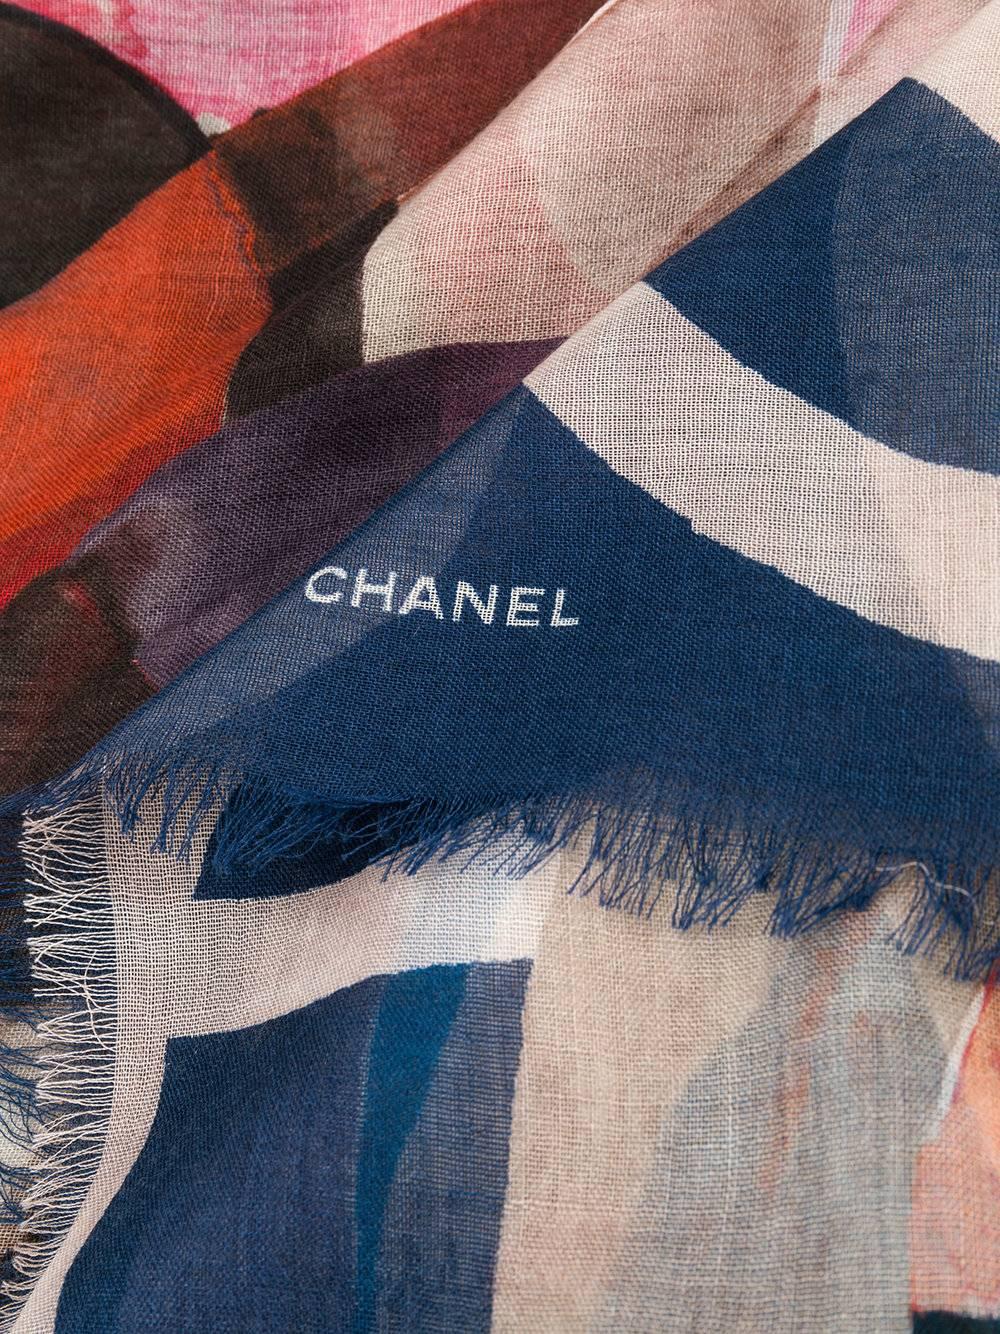 This scarf captures the beautiful elegance of Chanel. When the cut and material is more important than extravagance, pure silk scarfs reign with perfect cuts and subtlety. Crafted from delicate pure silk and cashmere, this multicoloured scarf